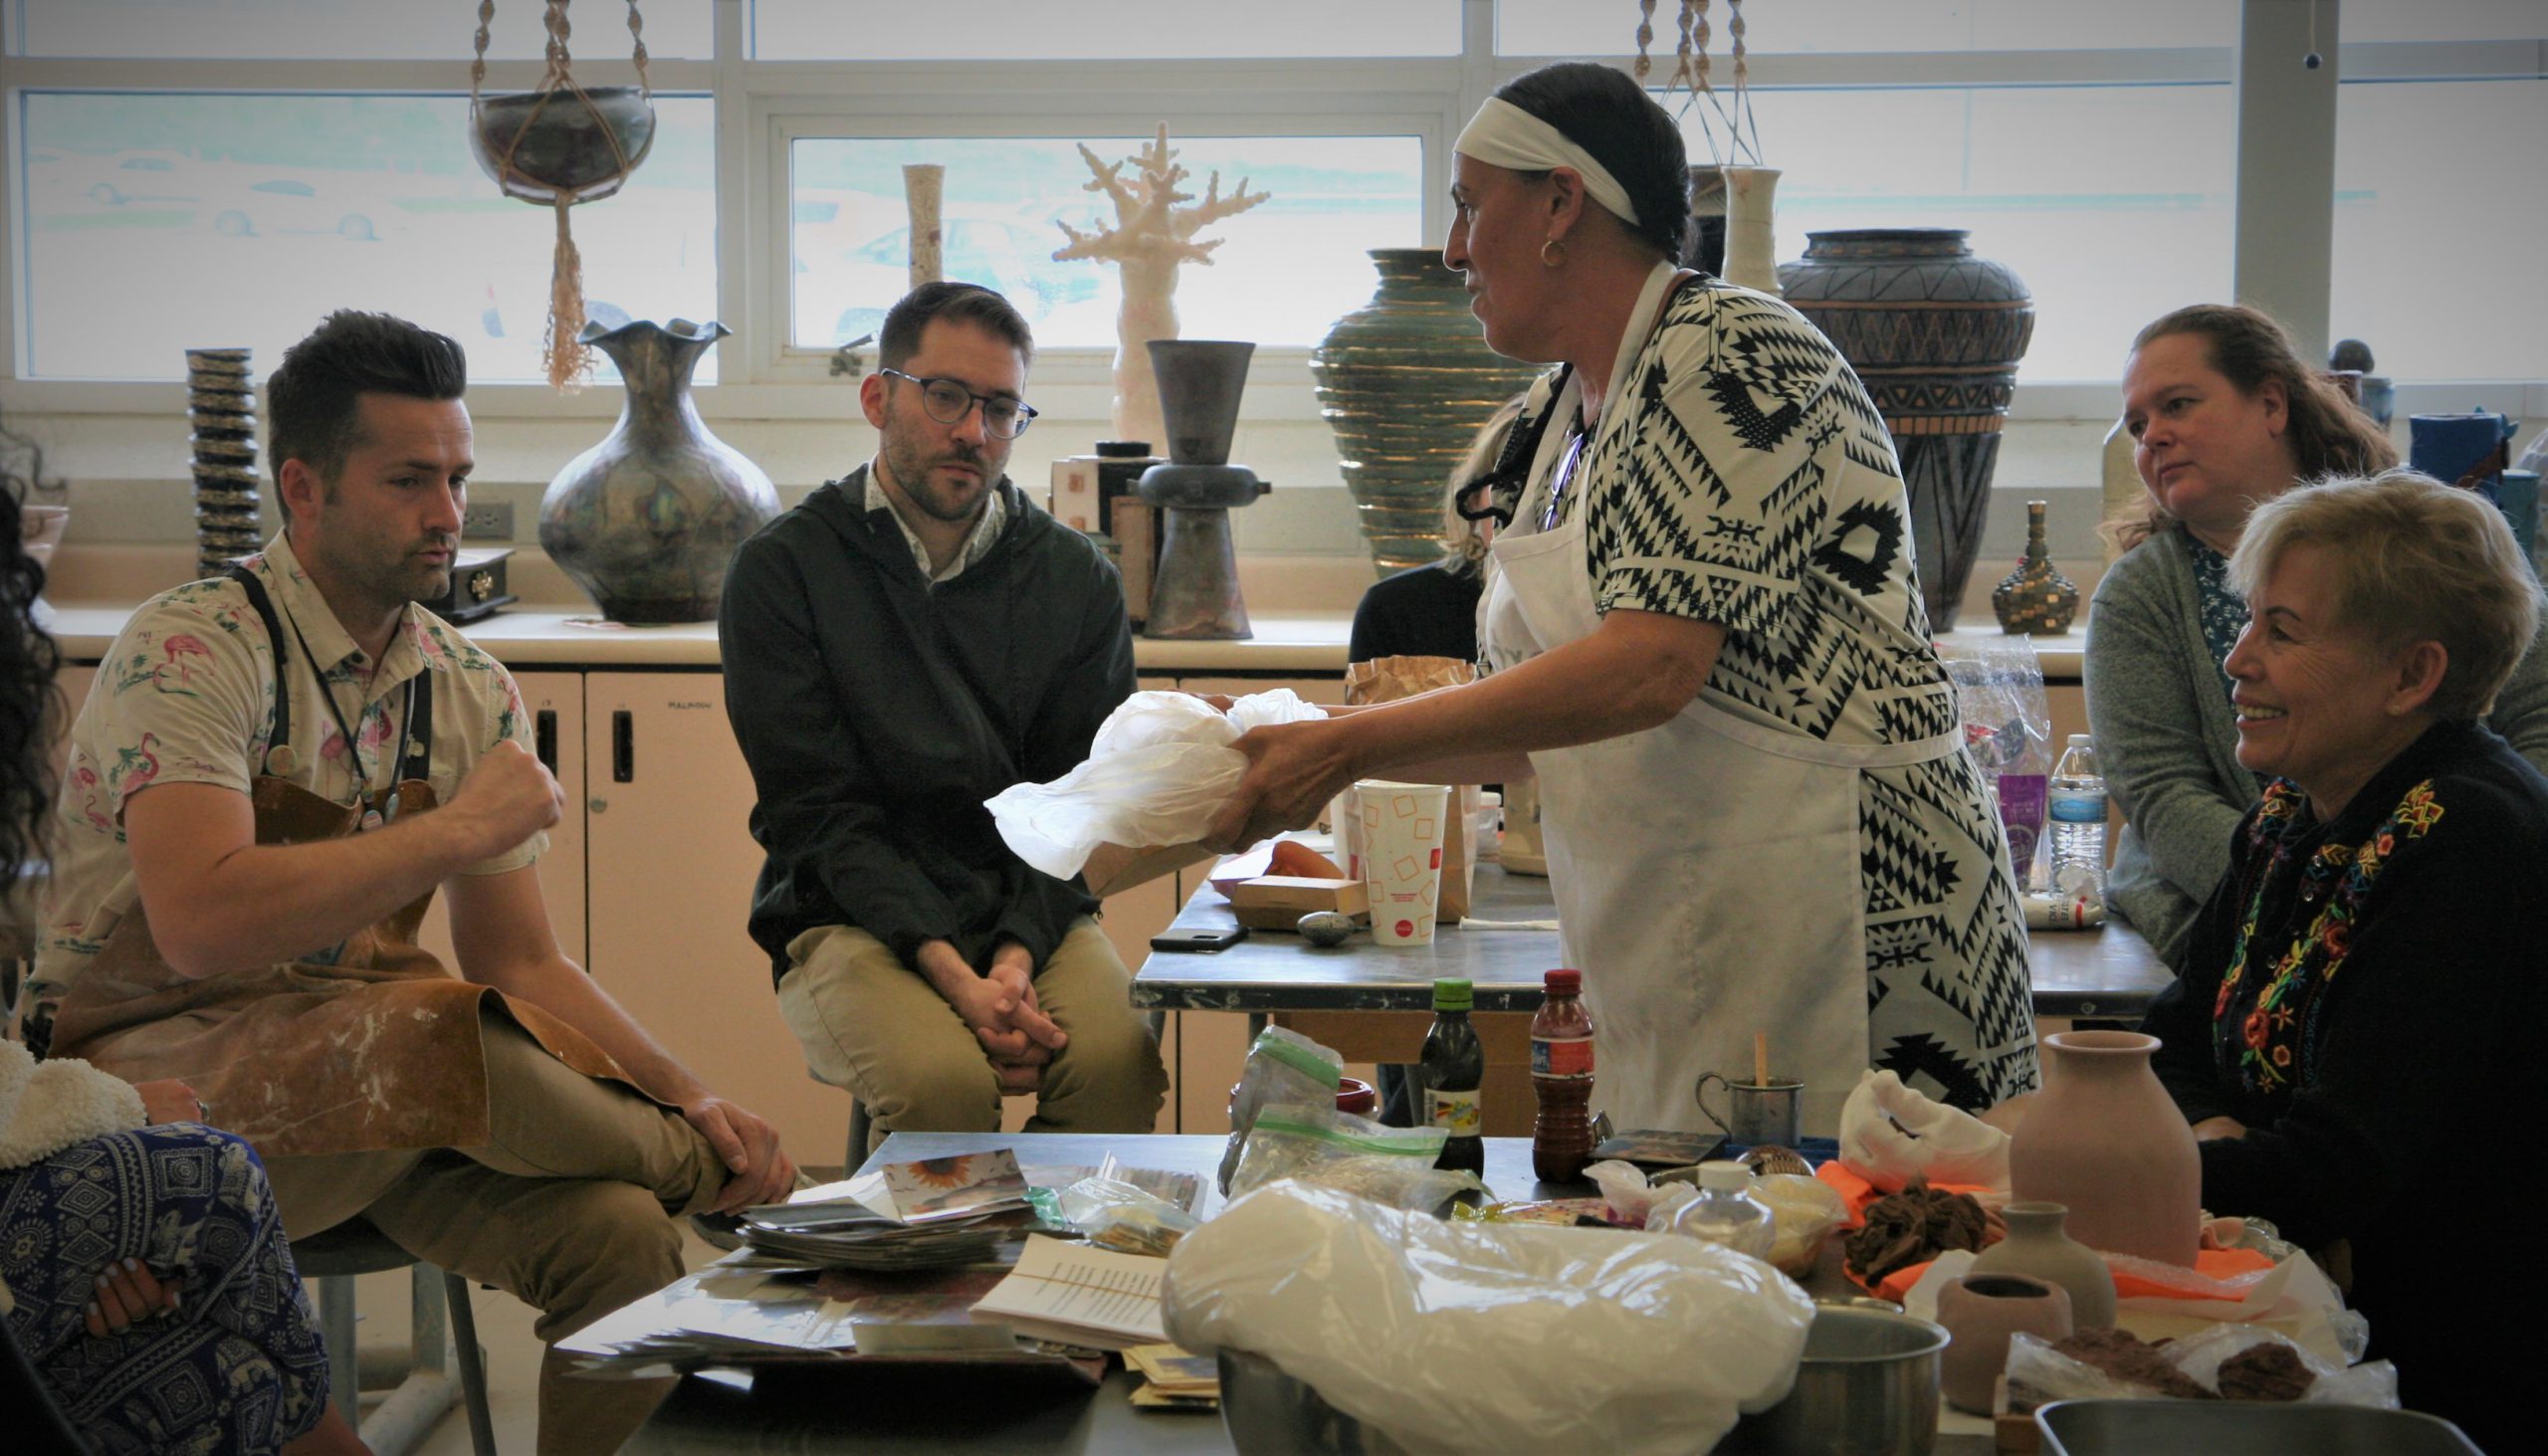 Four individuals sitting around an instructor in a pottery workshop.